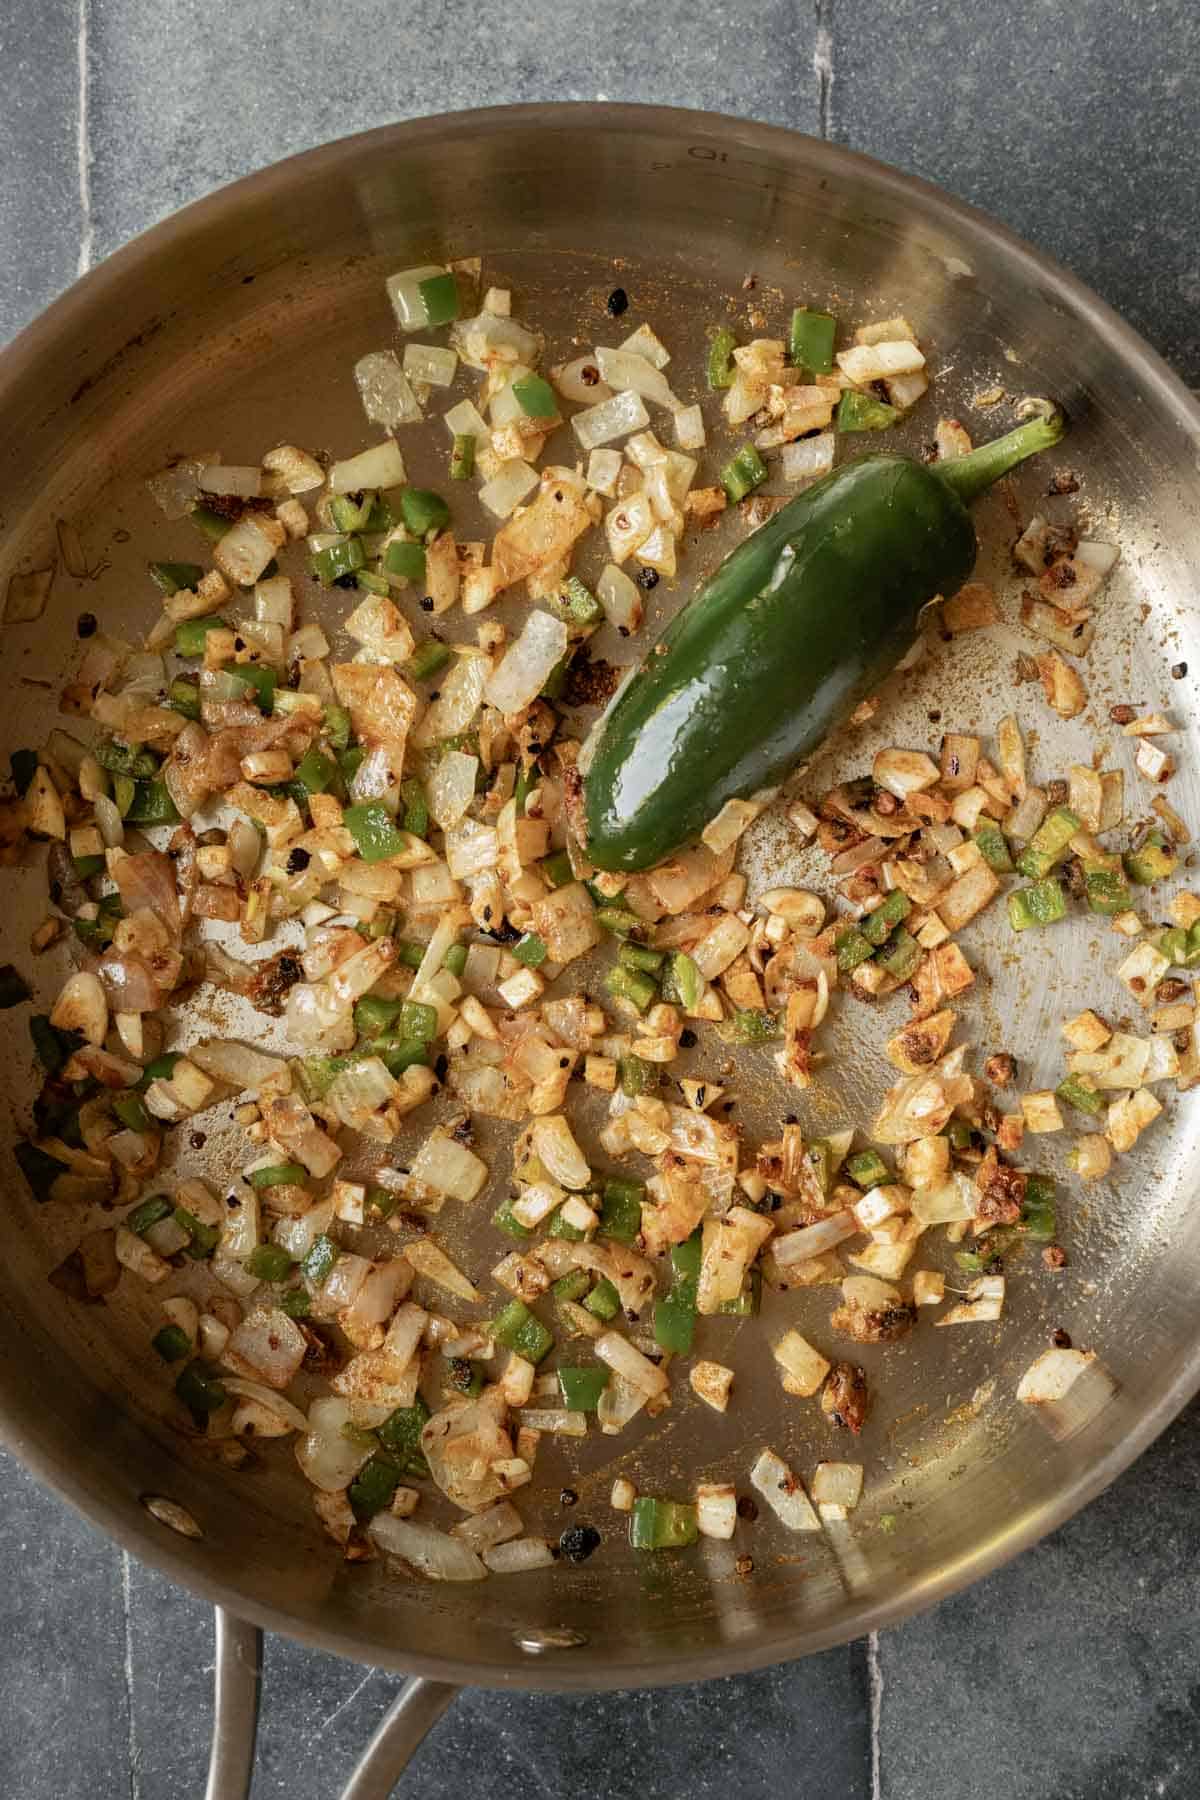 Sauteing onion, garlic, jalapeno, and spices.